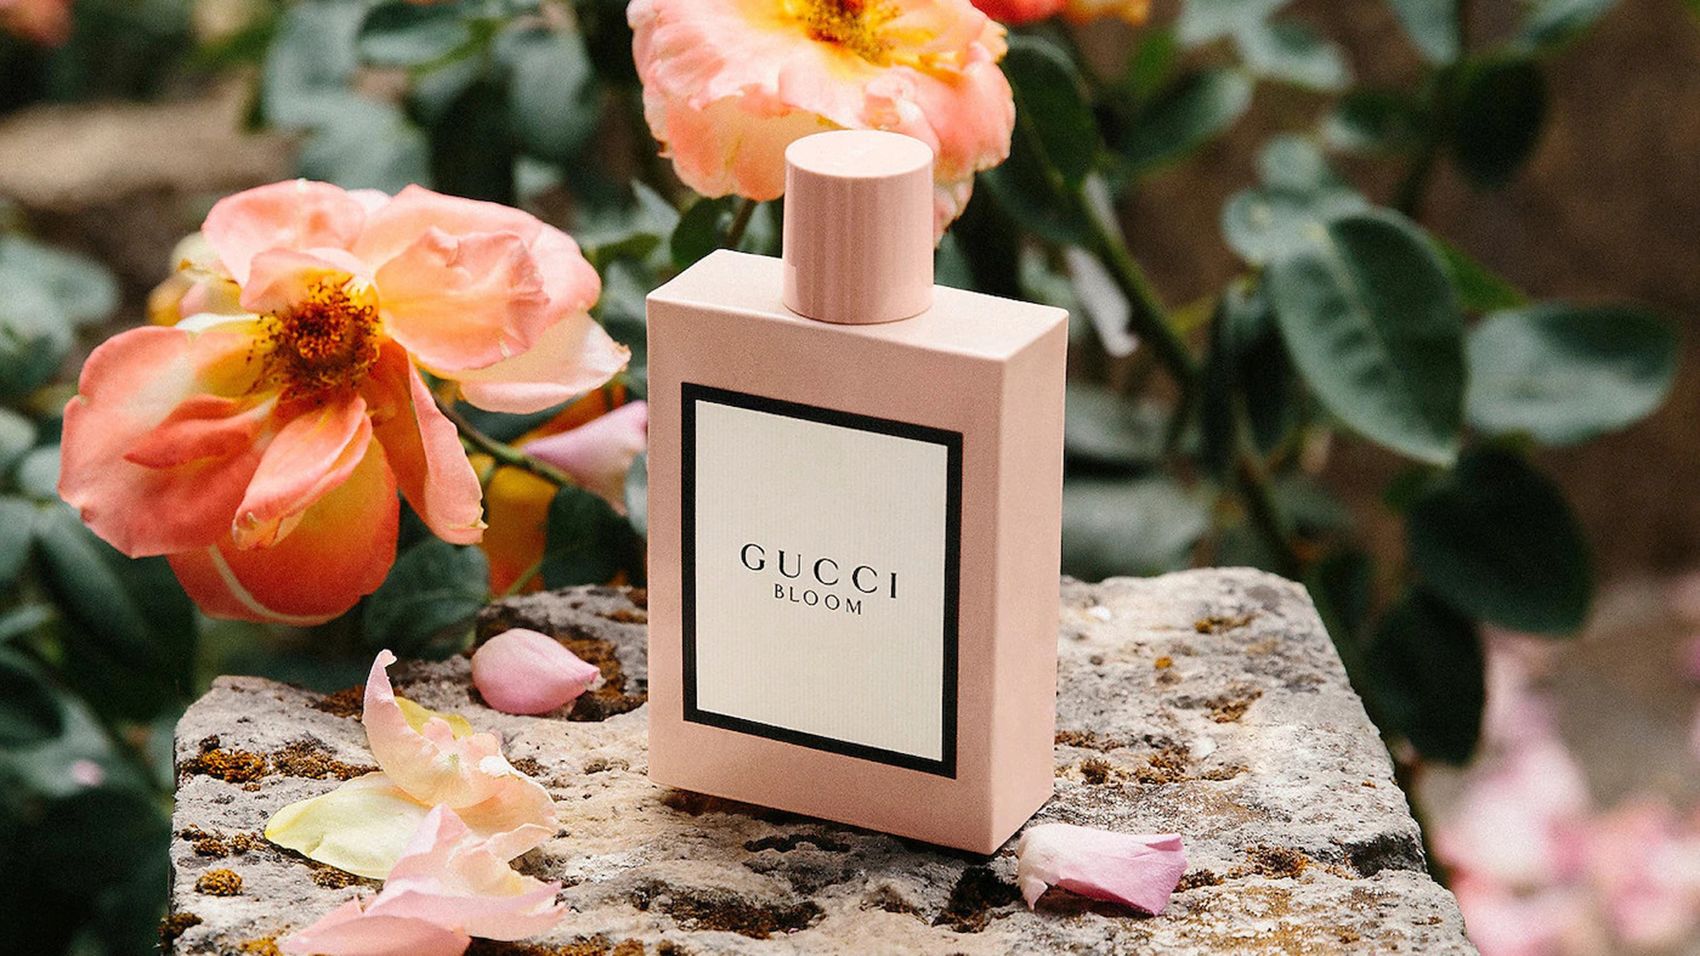 20 best perfumes for women she’ll wear everyday